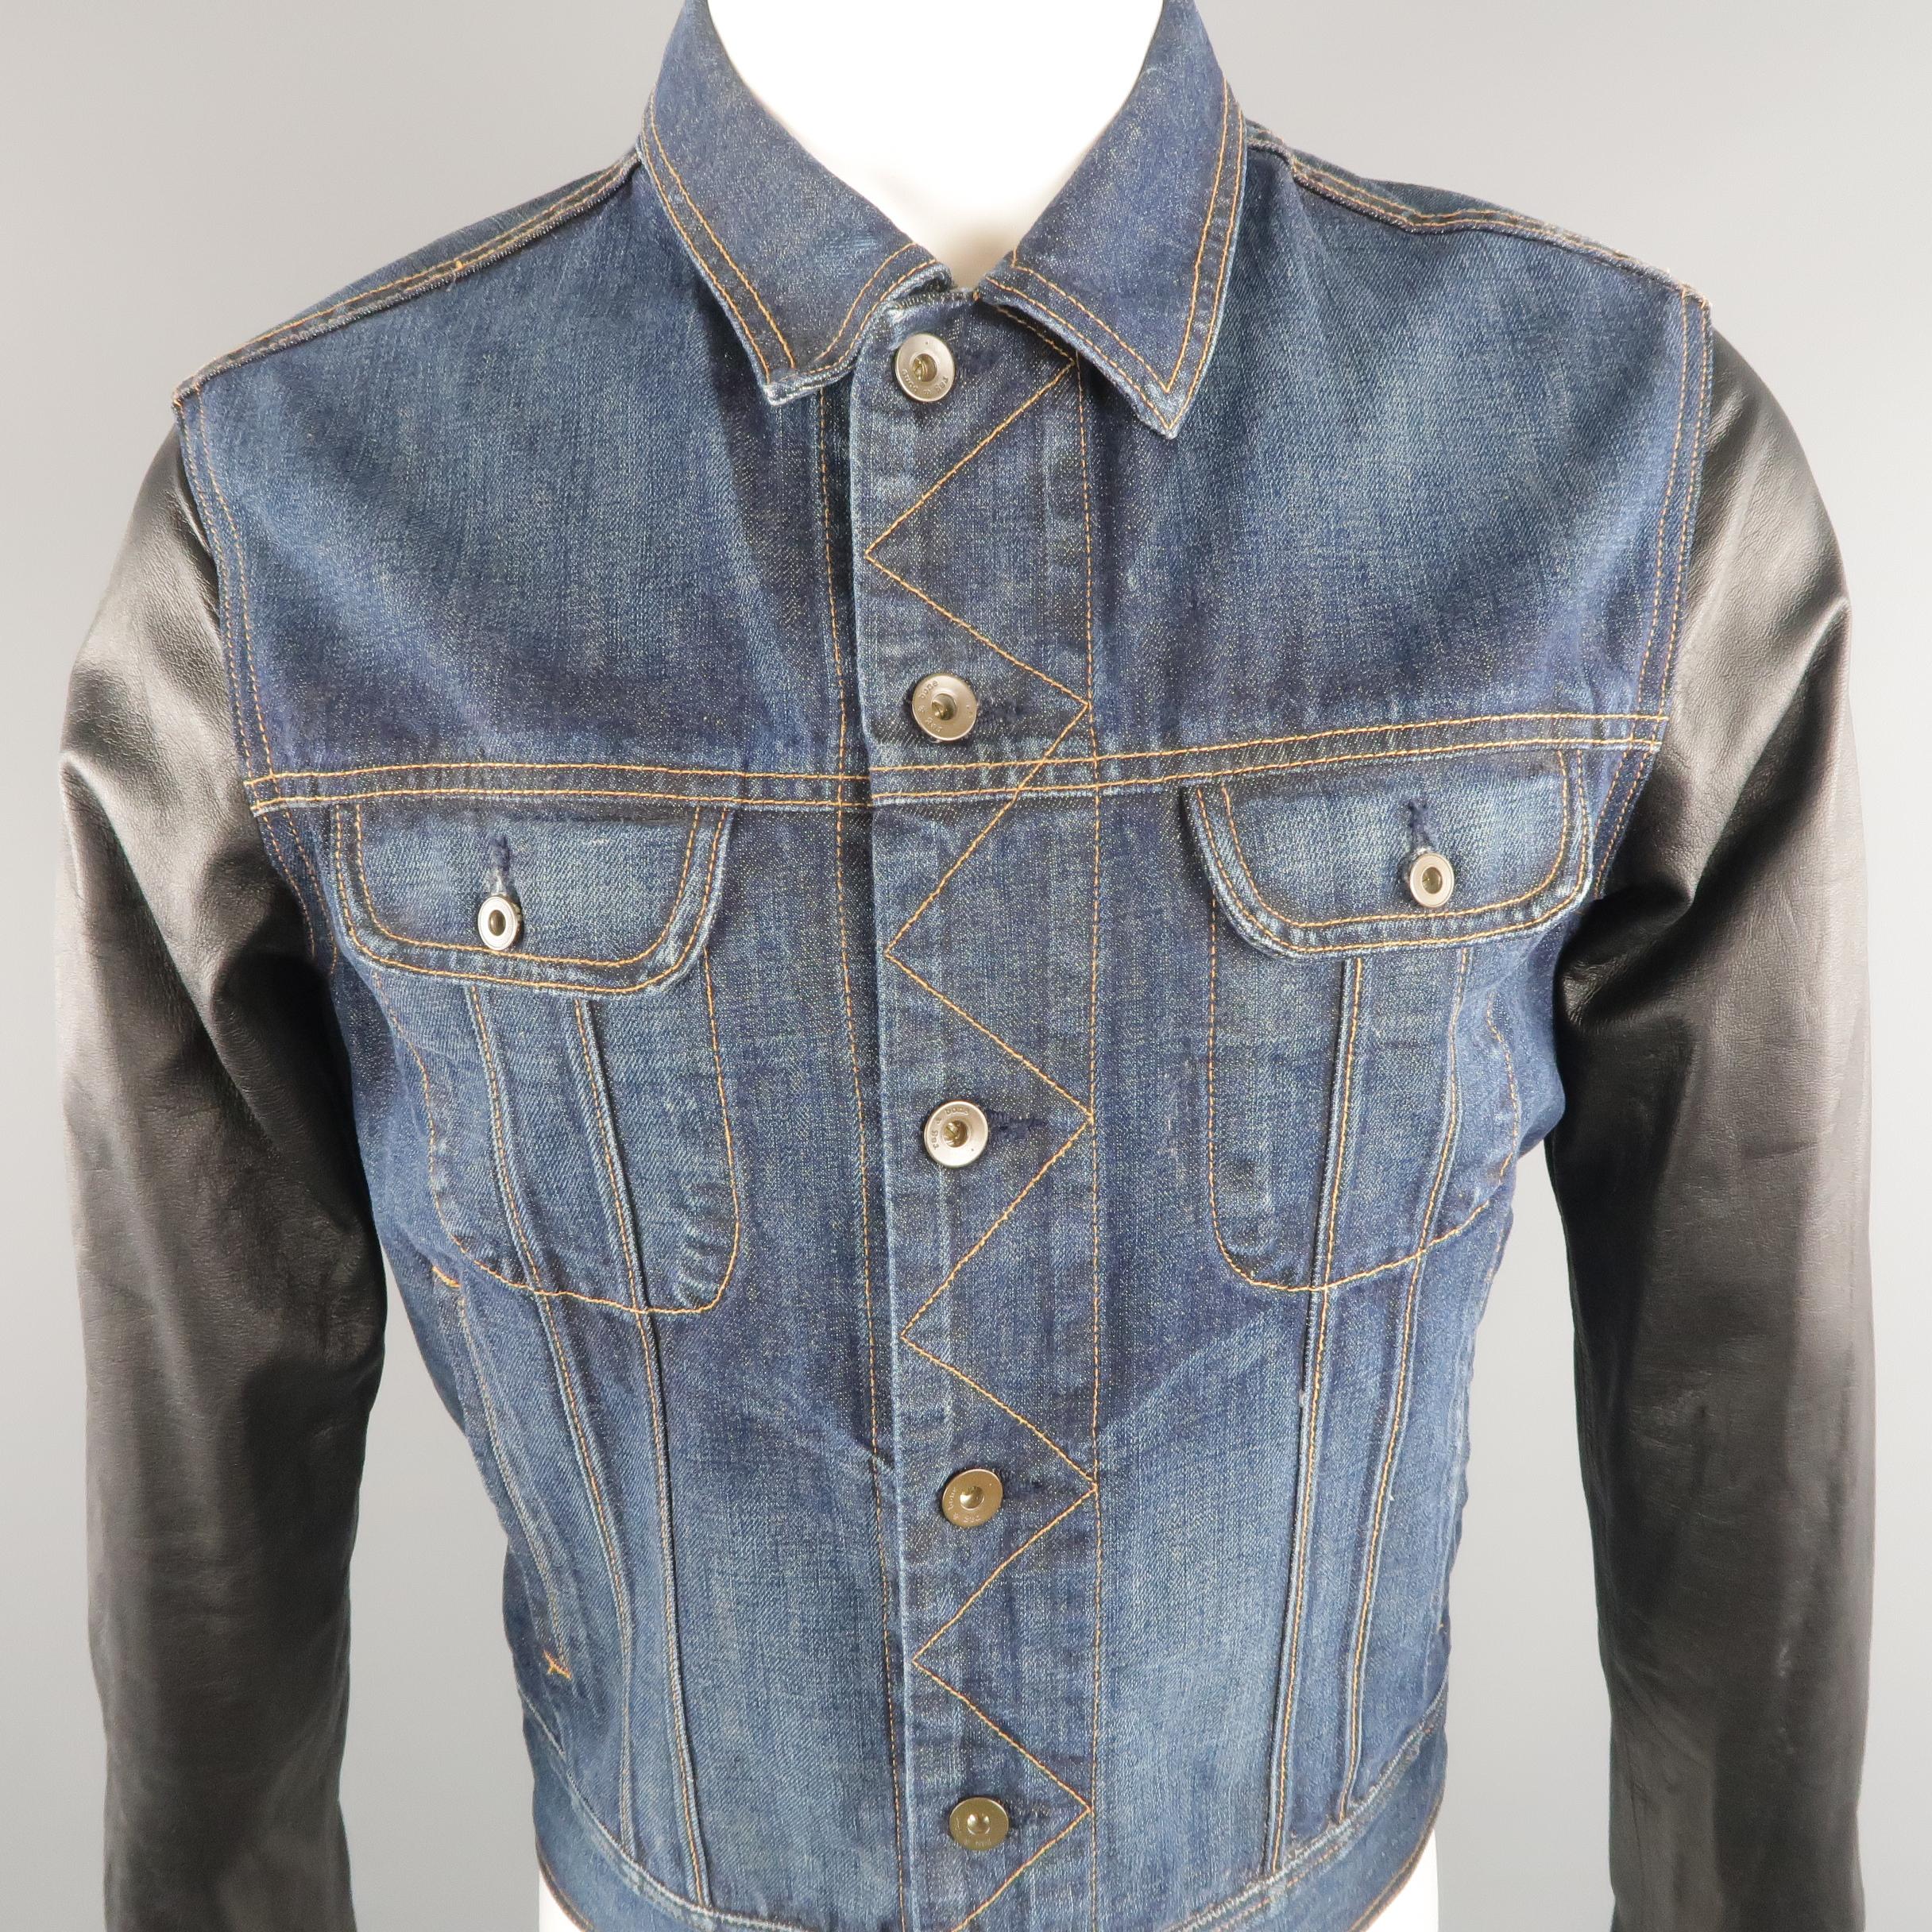 RAG & BONE trucker jacket come in indigo denim, leather sleeves, contrast stitches, and patch flap pockets. Made in USA
 
Excellent Pre-Owned Condition.
Marked: M US
 
Measurements:
 
Shoulder: 17 in.
Chest: 41 in.
Sleeve: 27 in.
Length: 24.5 in.   